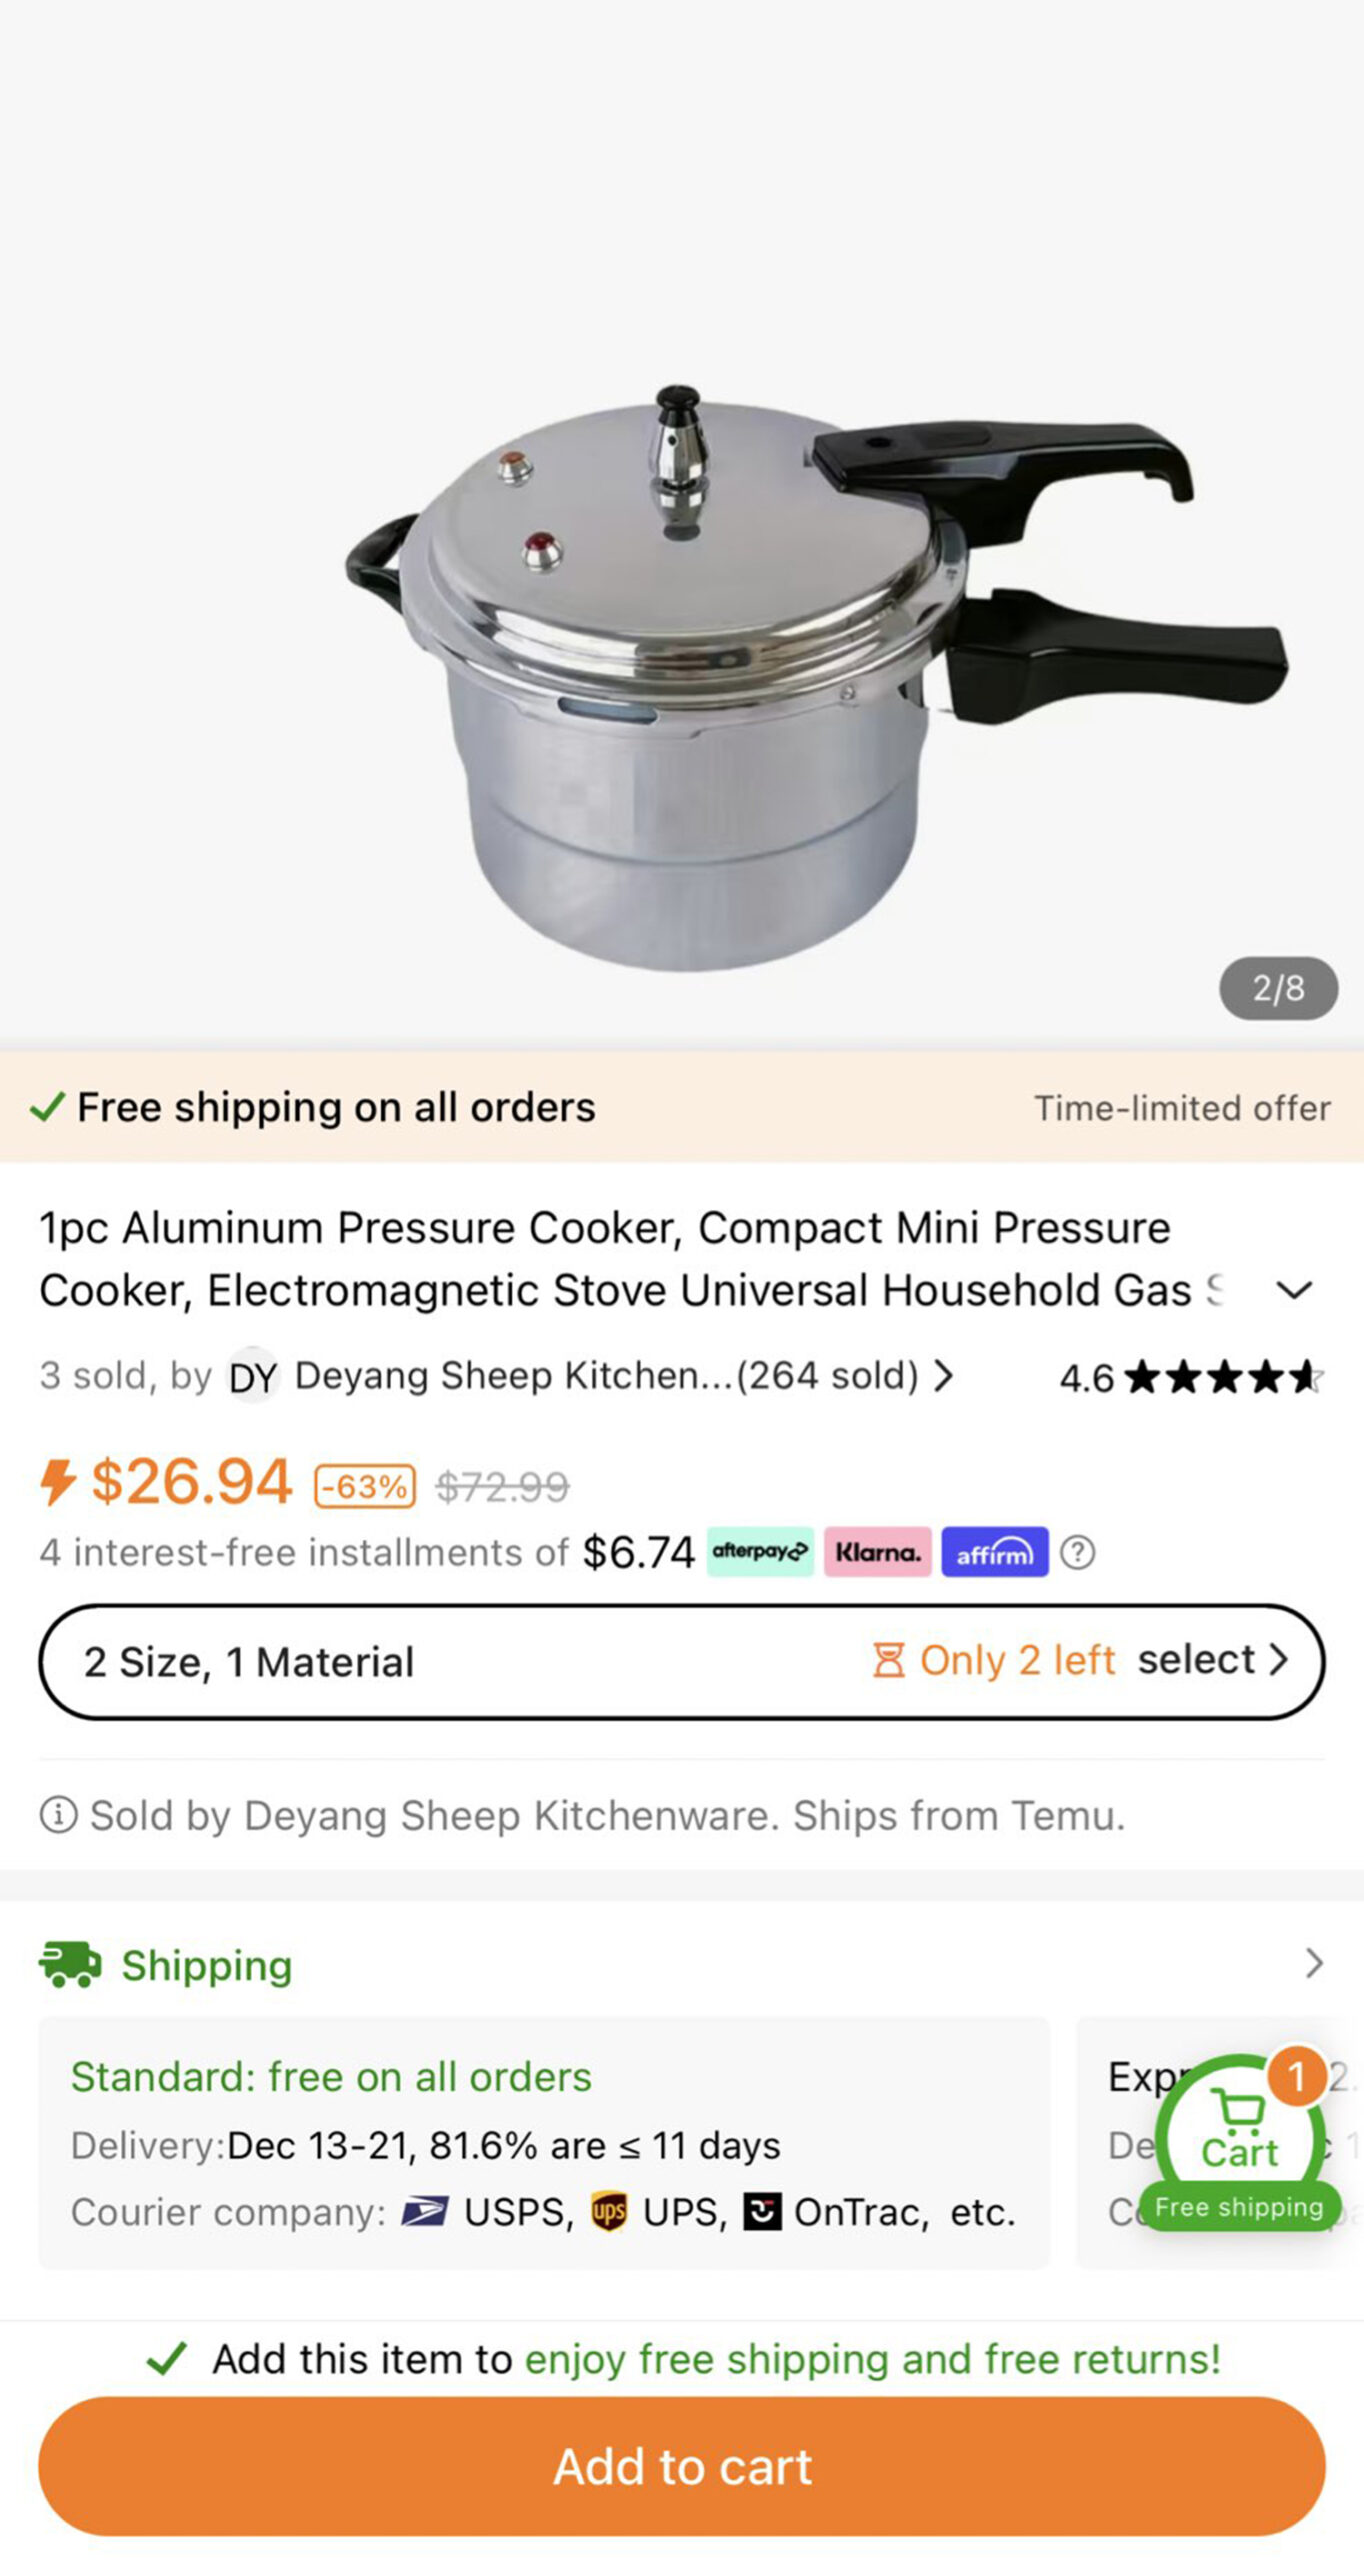 the website product page for the tiny pressure cooker on sale on Temu.